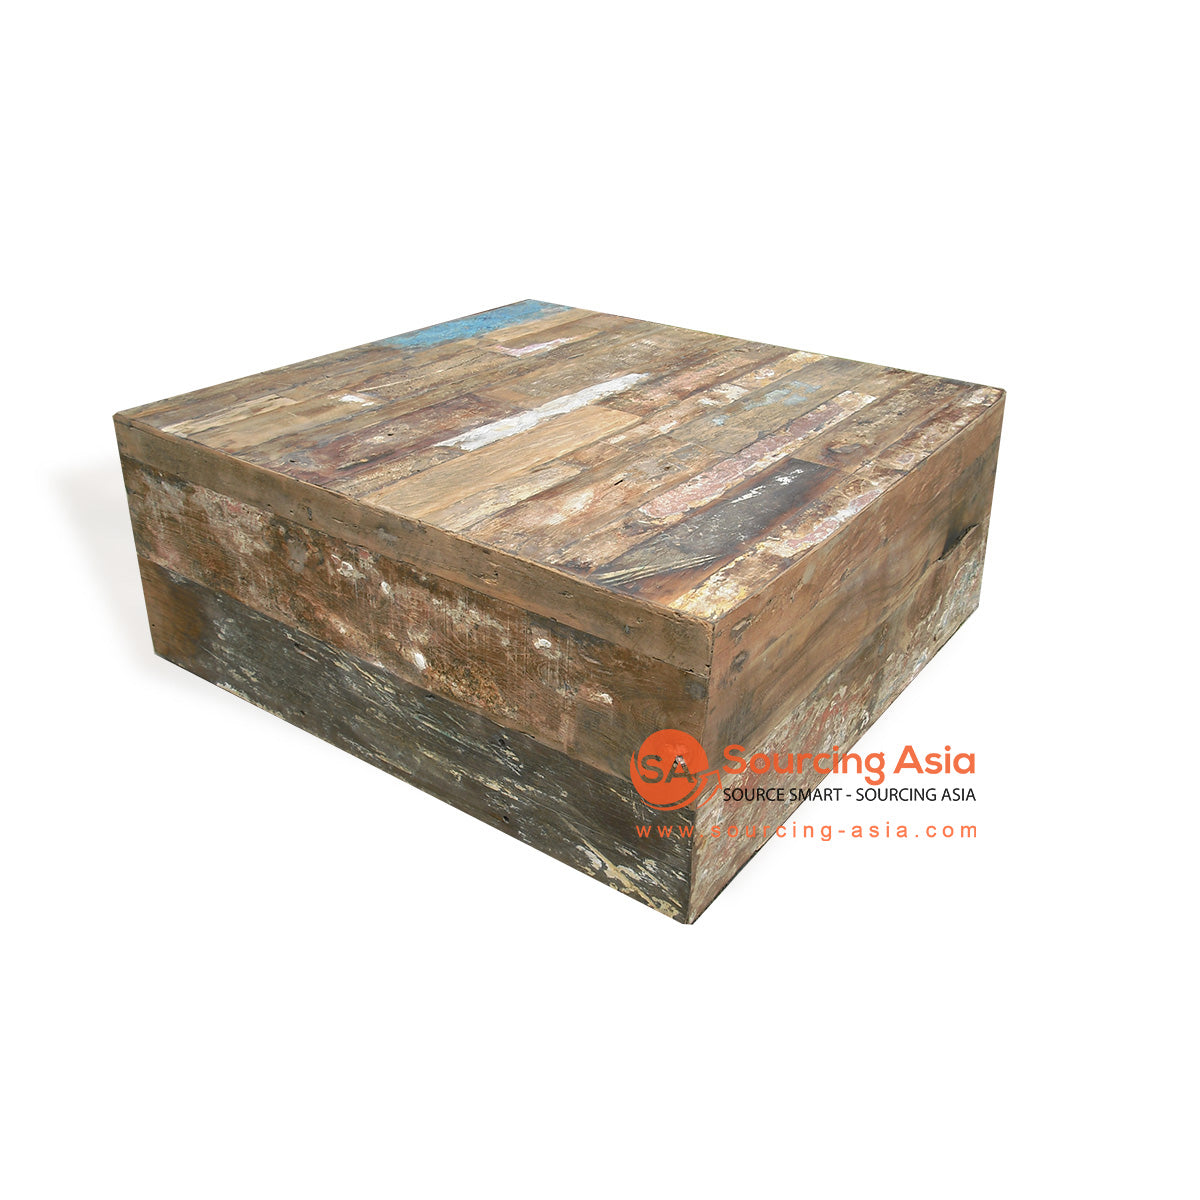 WK005 NATURAL RECYCLED BOAT WOOD SOLID BLOCK COFFEE TABLE